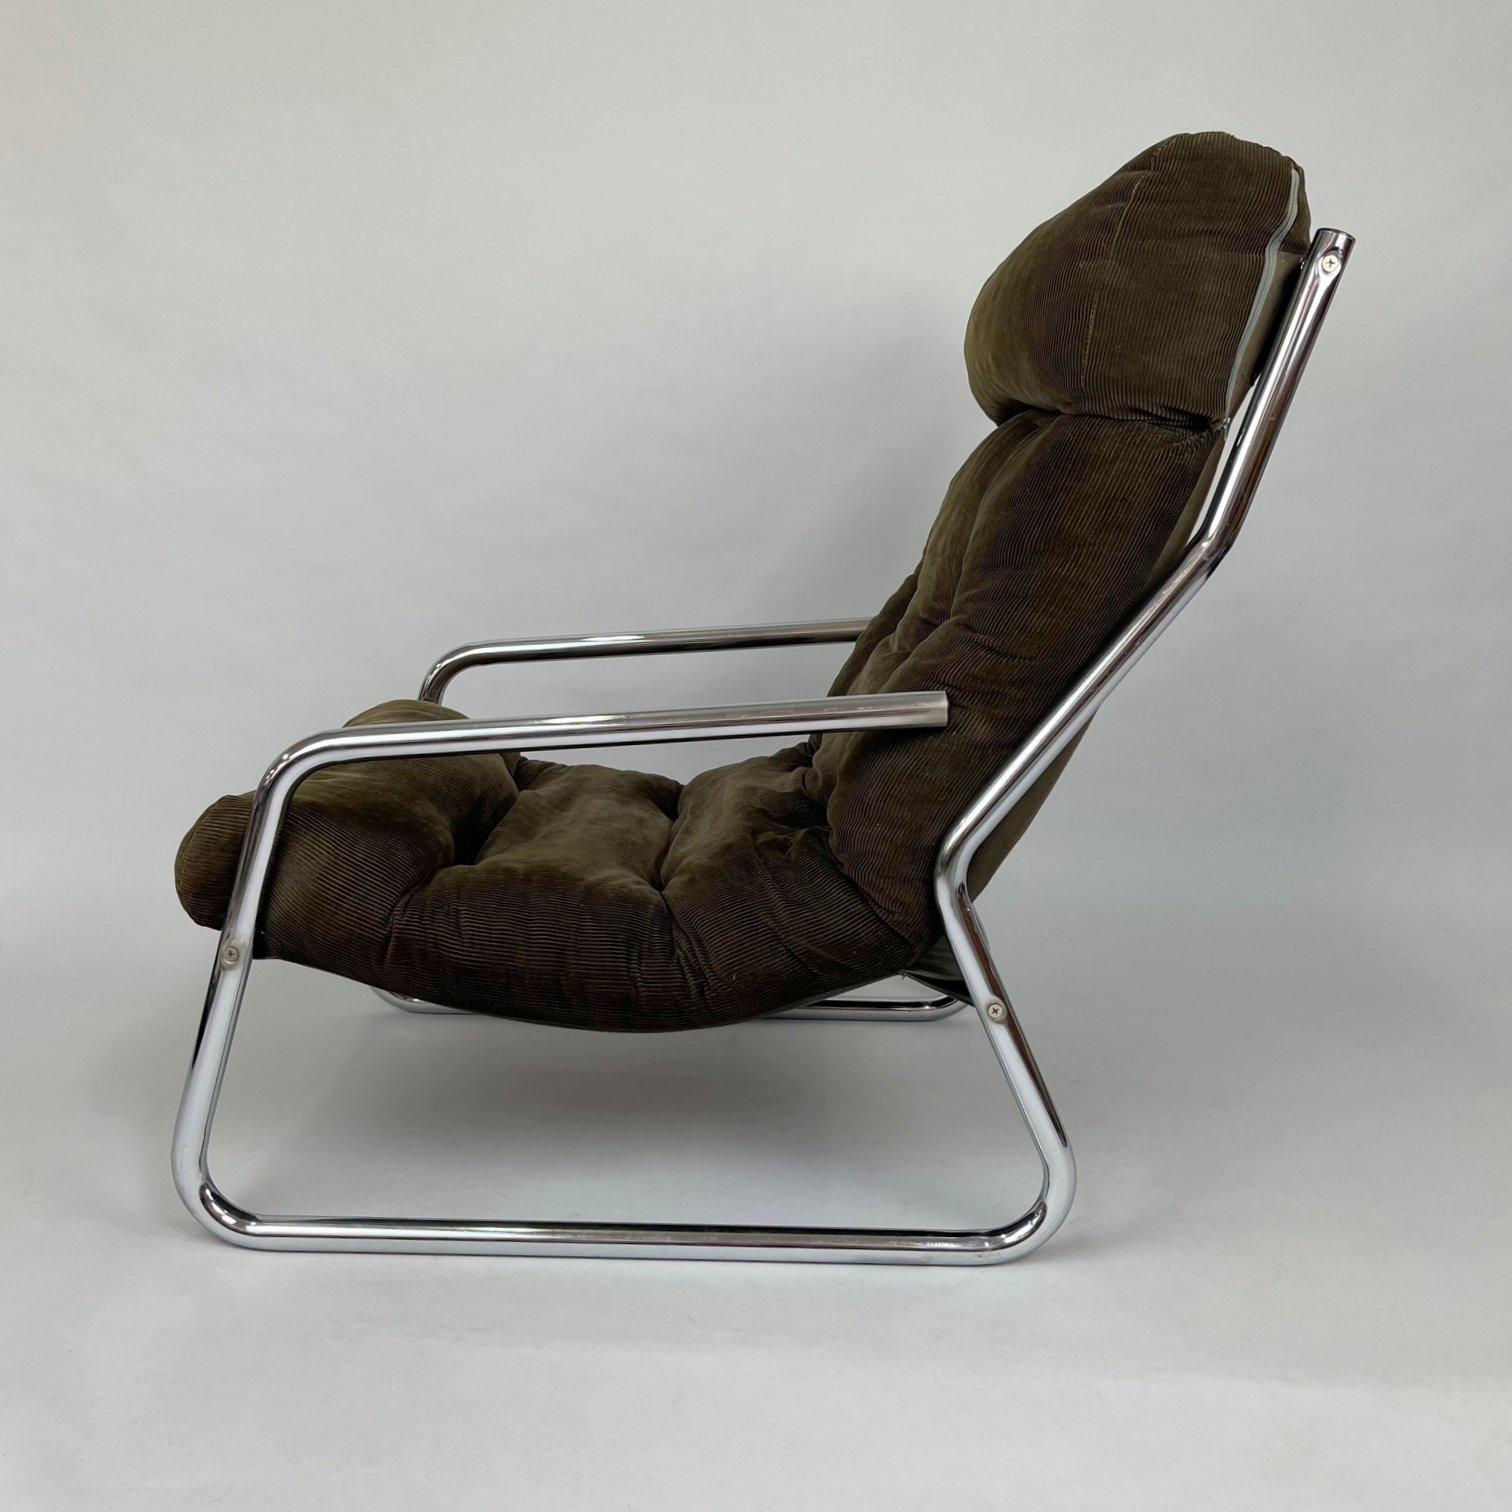 Very comfortable, stable chrome armchair with original corduroy cover. 
All imperfections and signs of use can be seen in the photos.